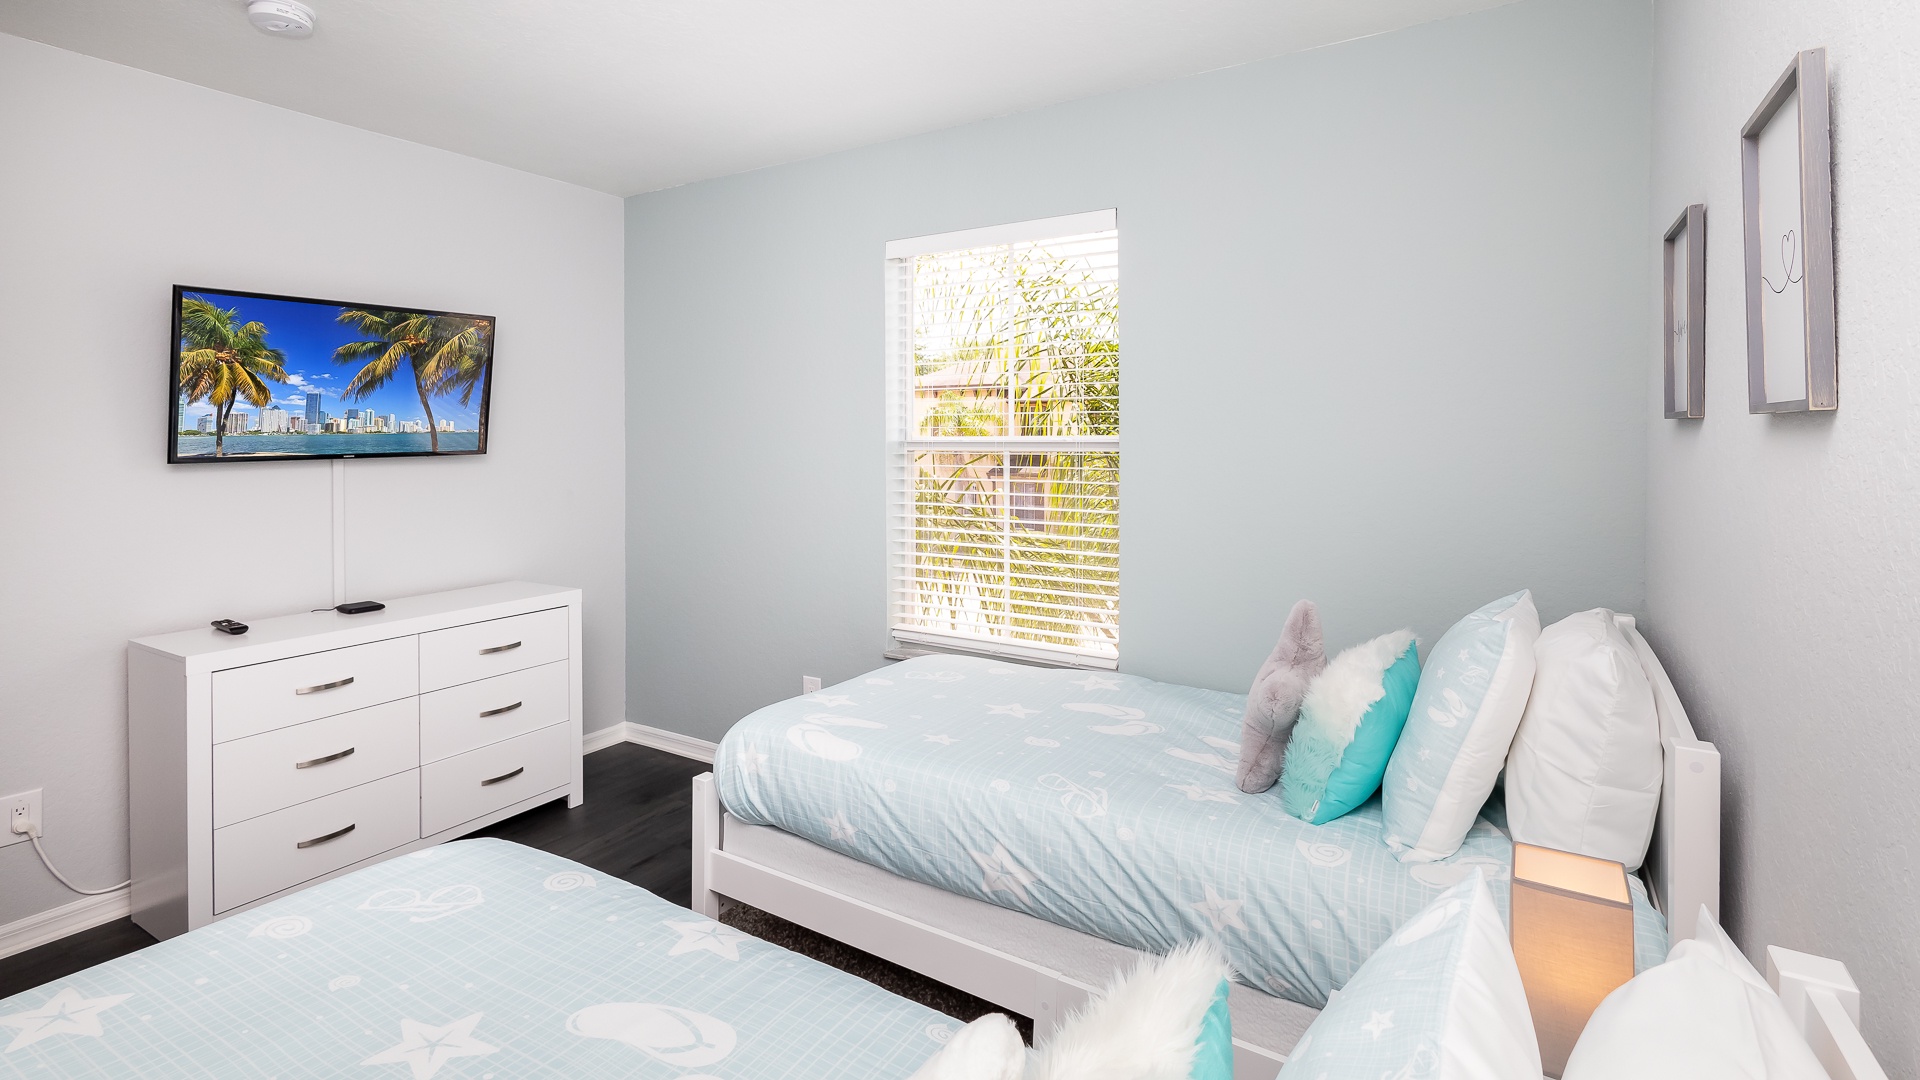 The final bedroom features a pair of cozy twin beds & Smart TV